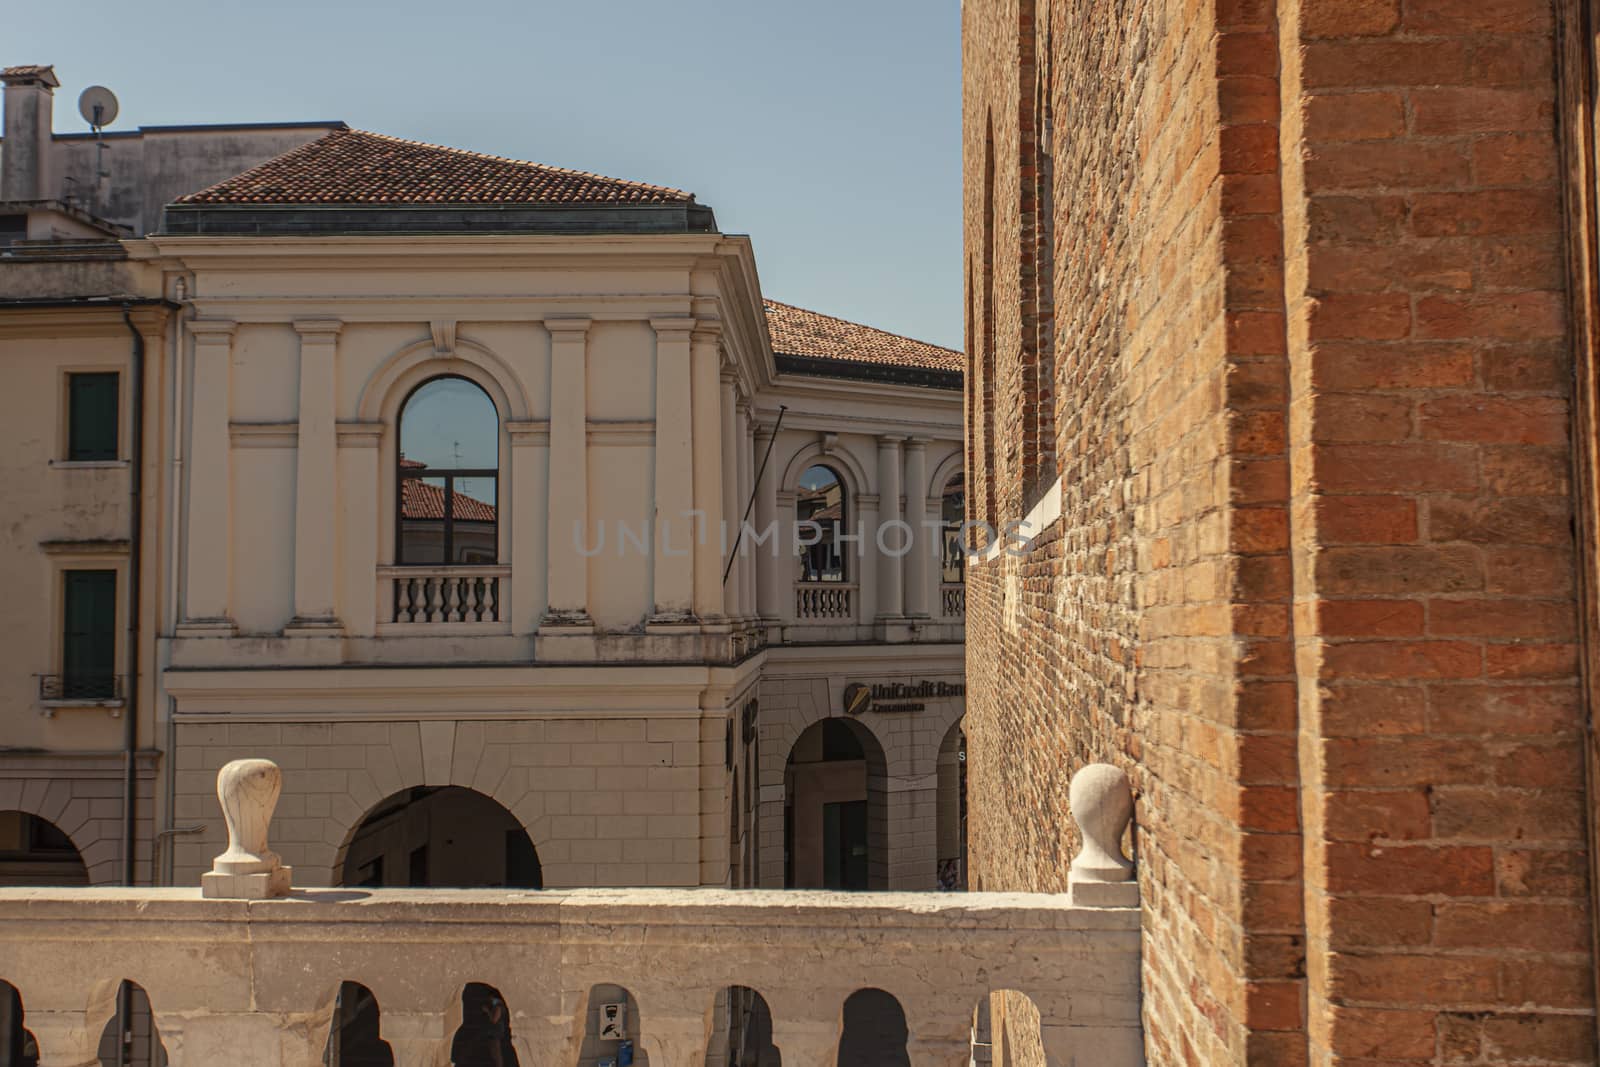 TREVISO, ITALY 13 AUGUST 2020: Detail of the handrail of Palazzo dei Trecento in Treviso in Italy